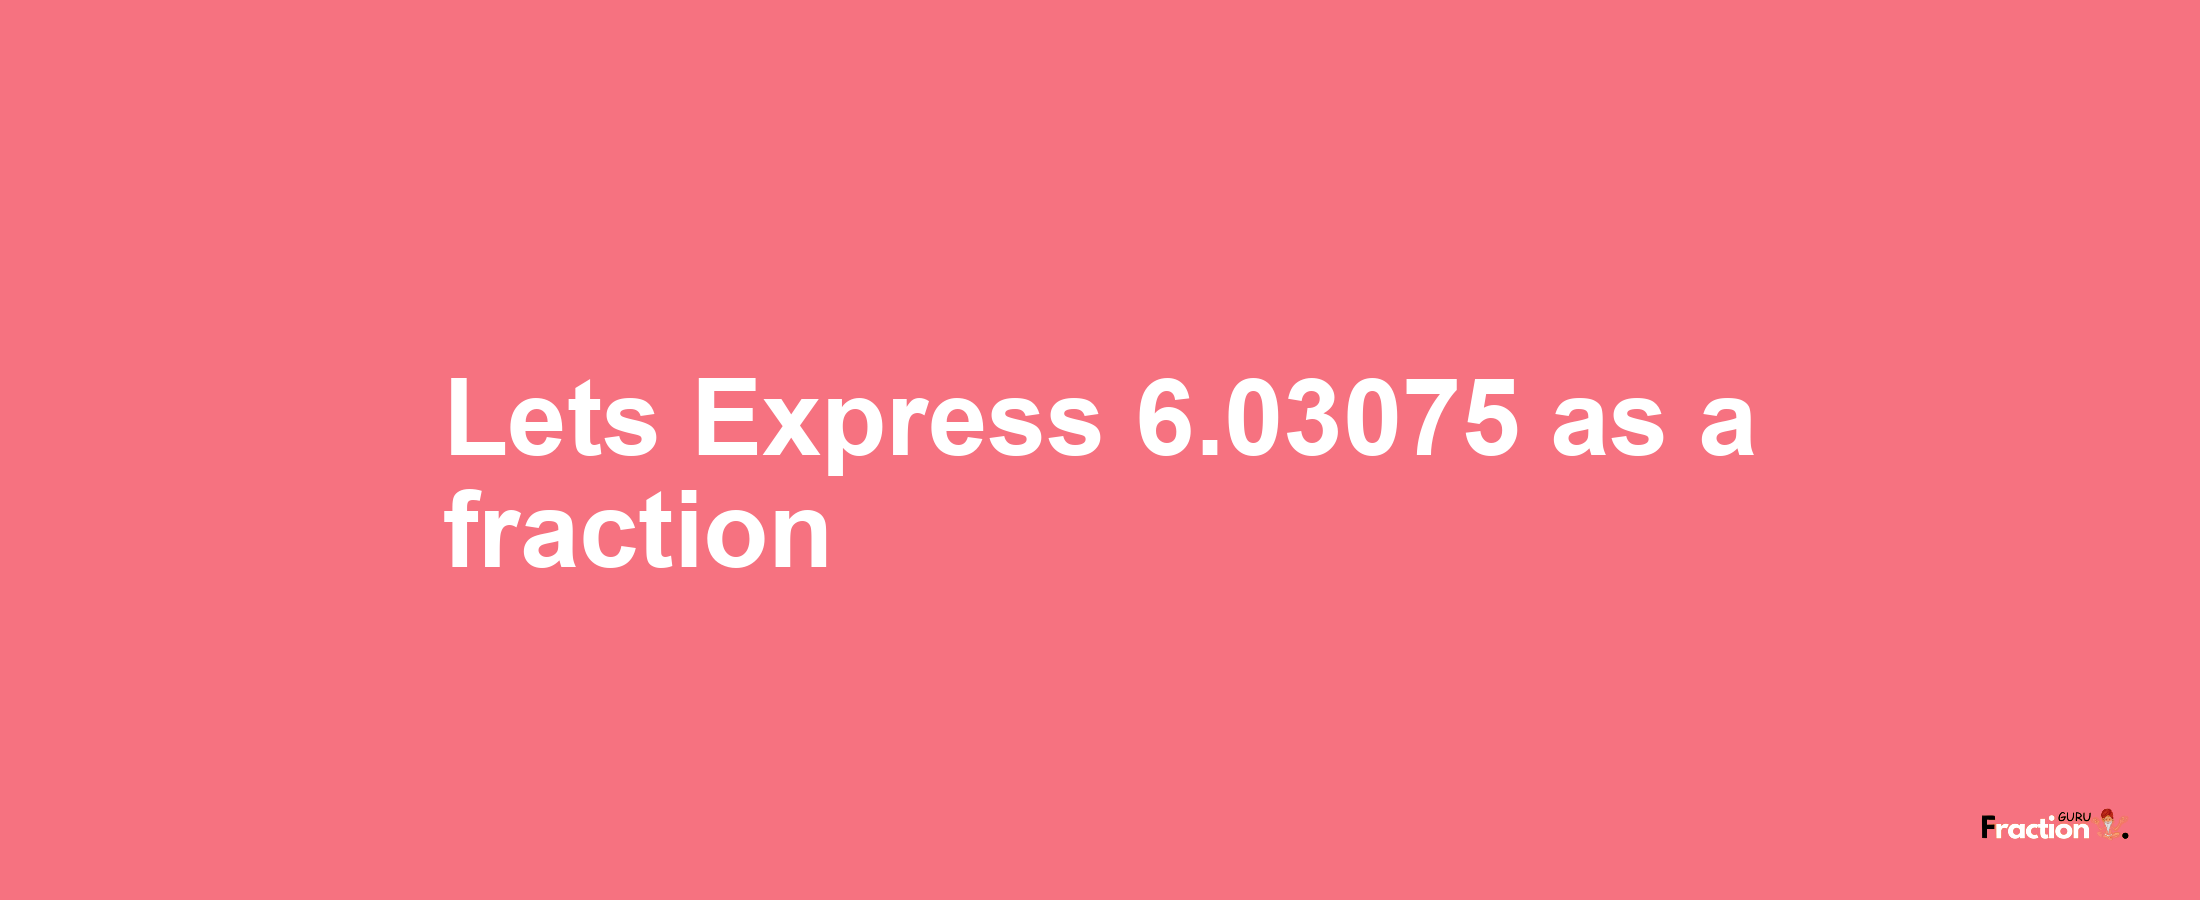 Lets Express 6.03075 as afraction